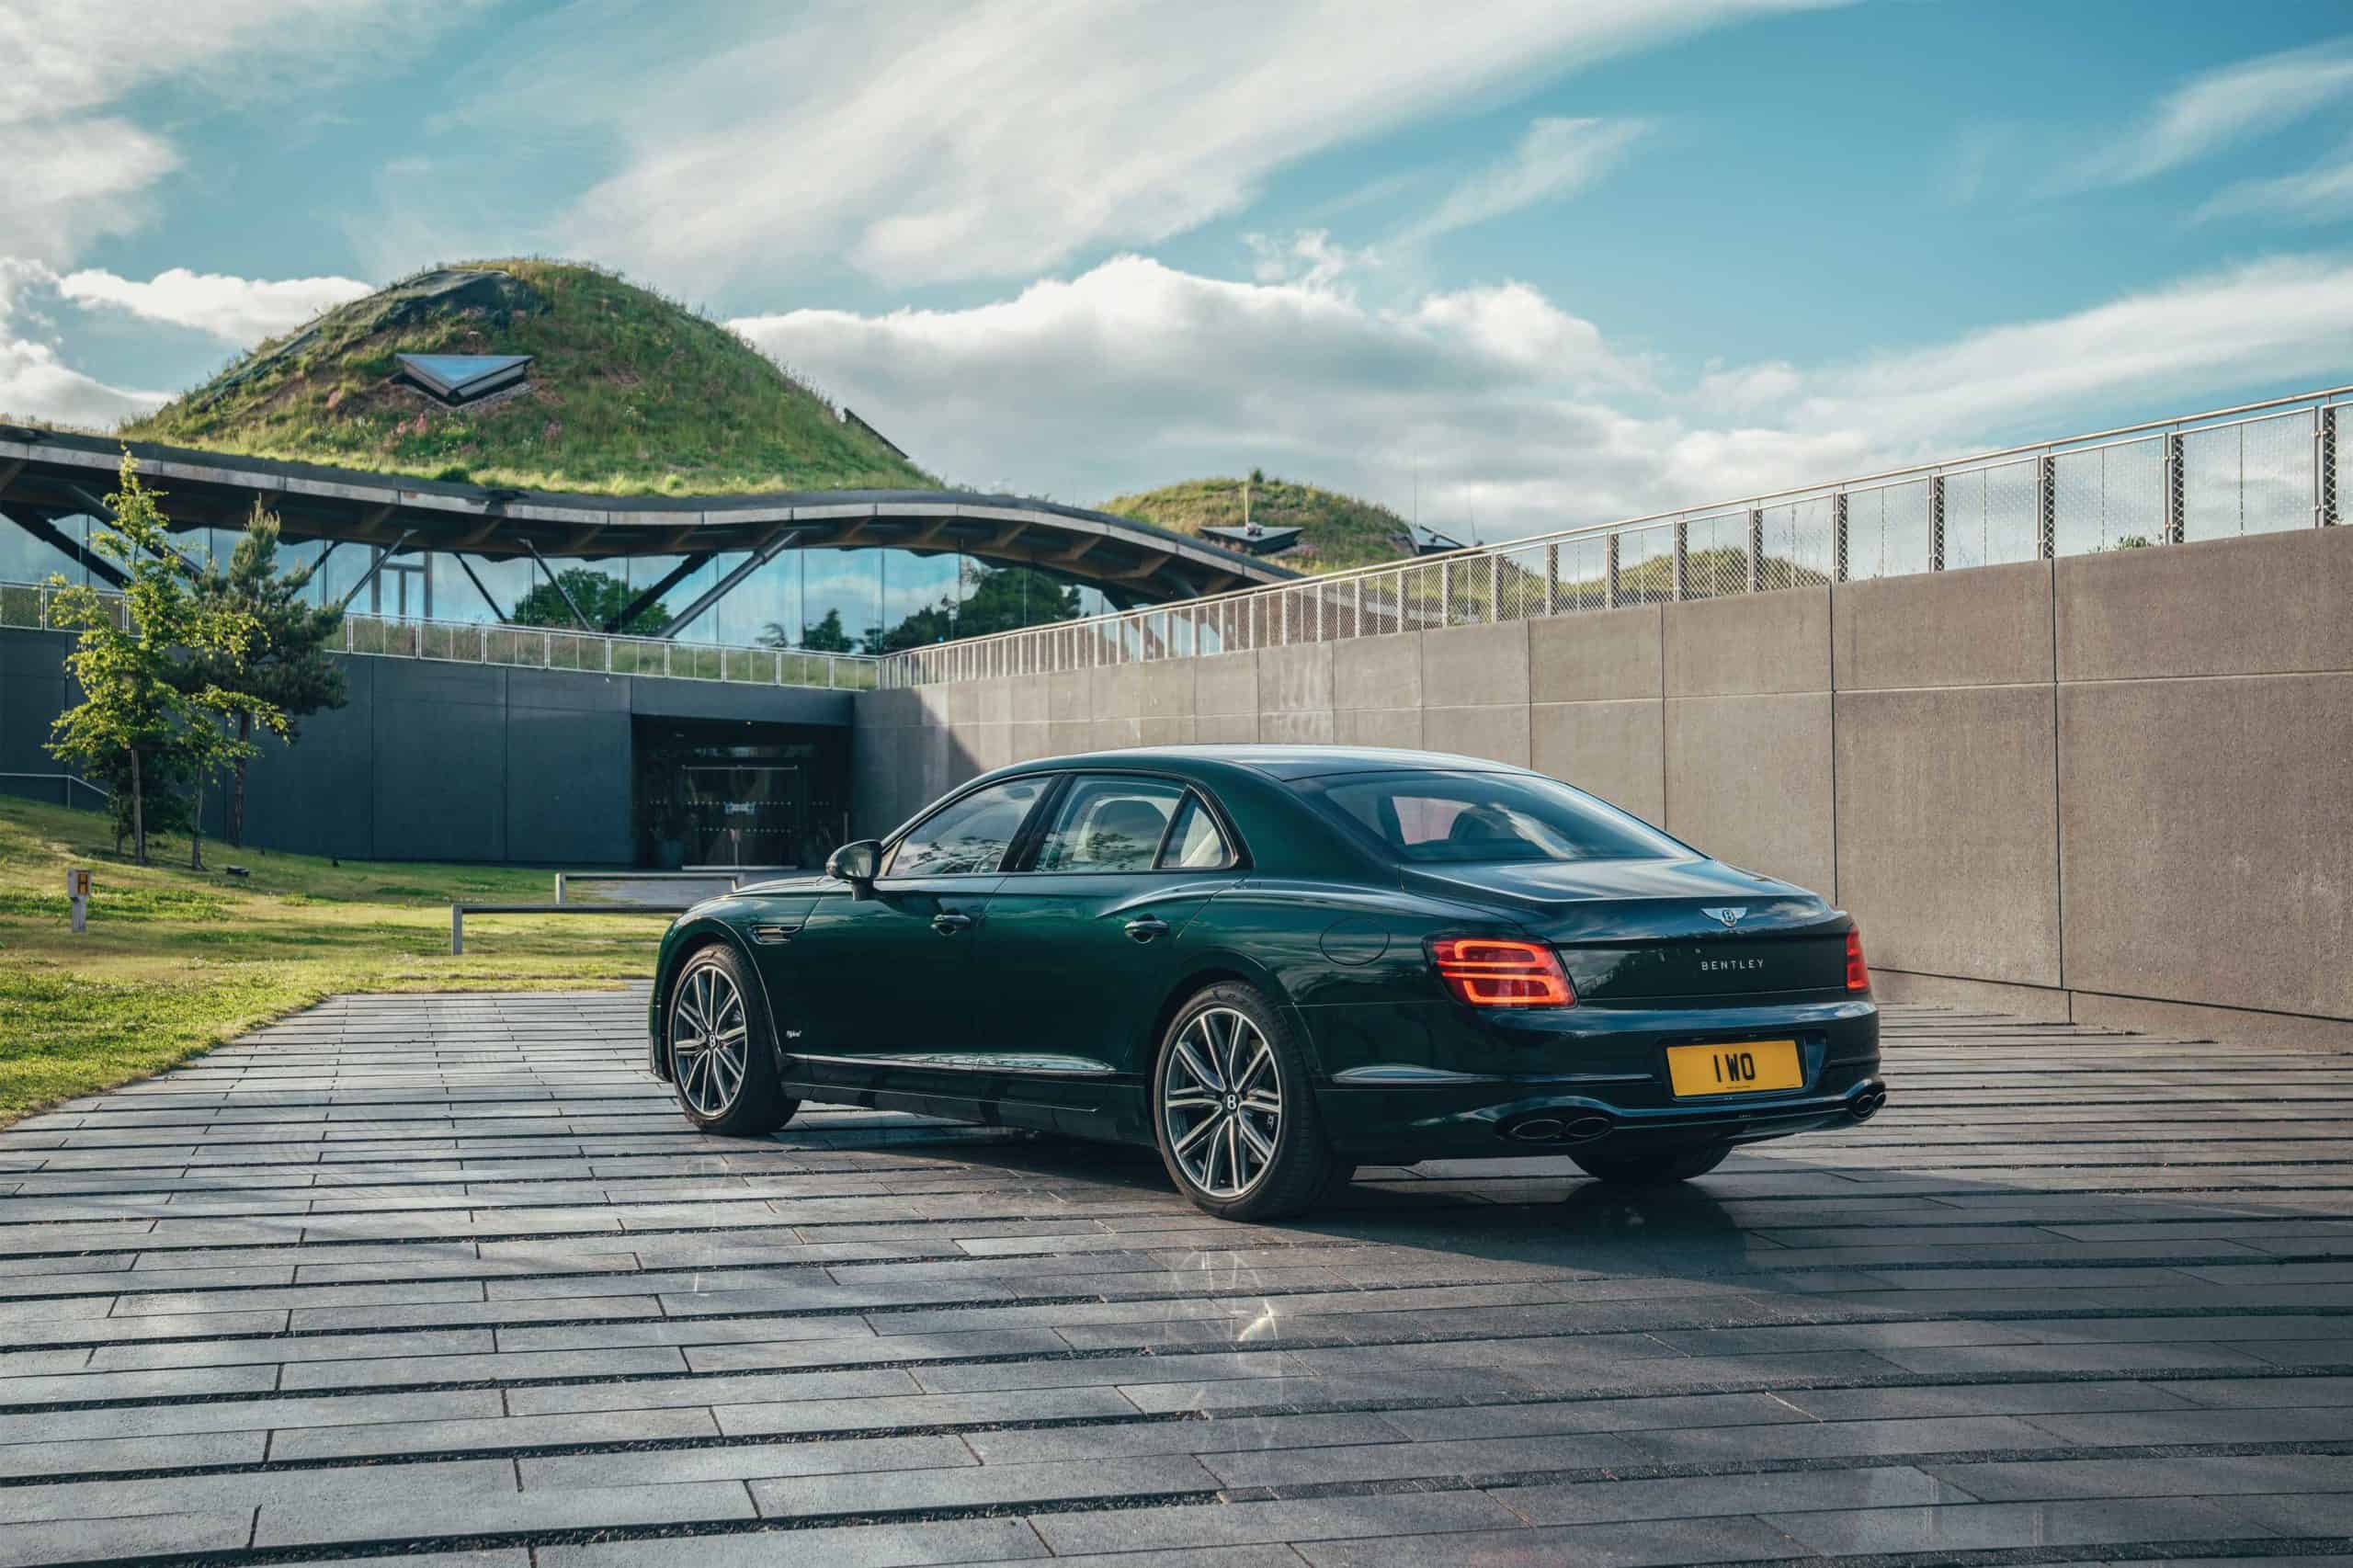 Bentley announces details of it's all new Luxury Hybrid car